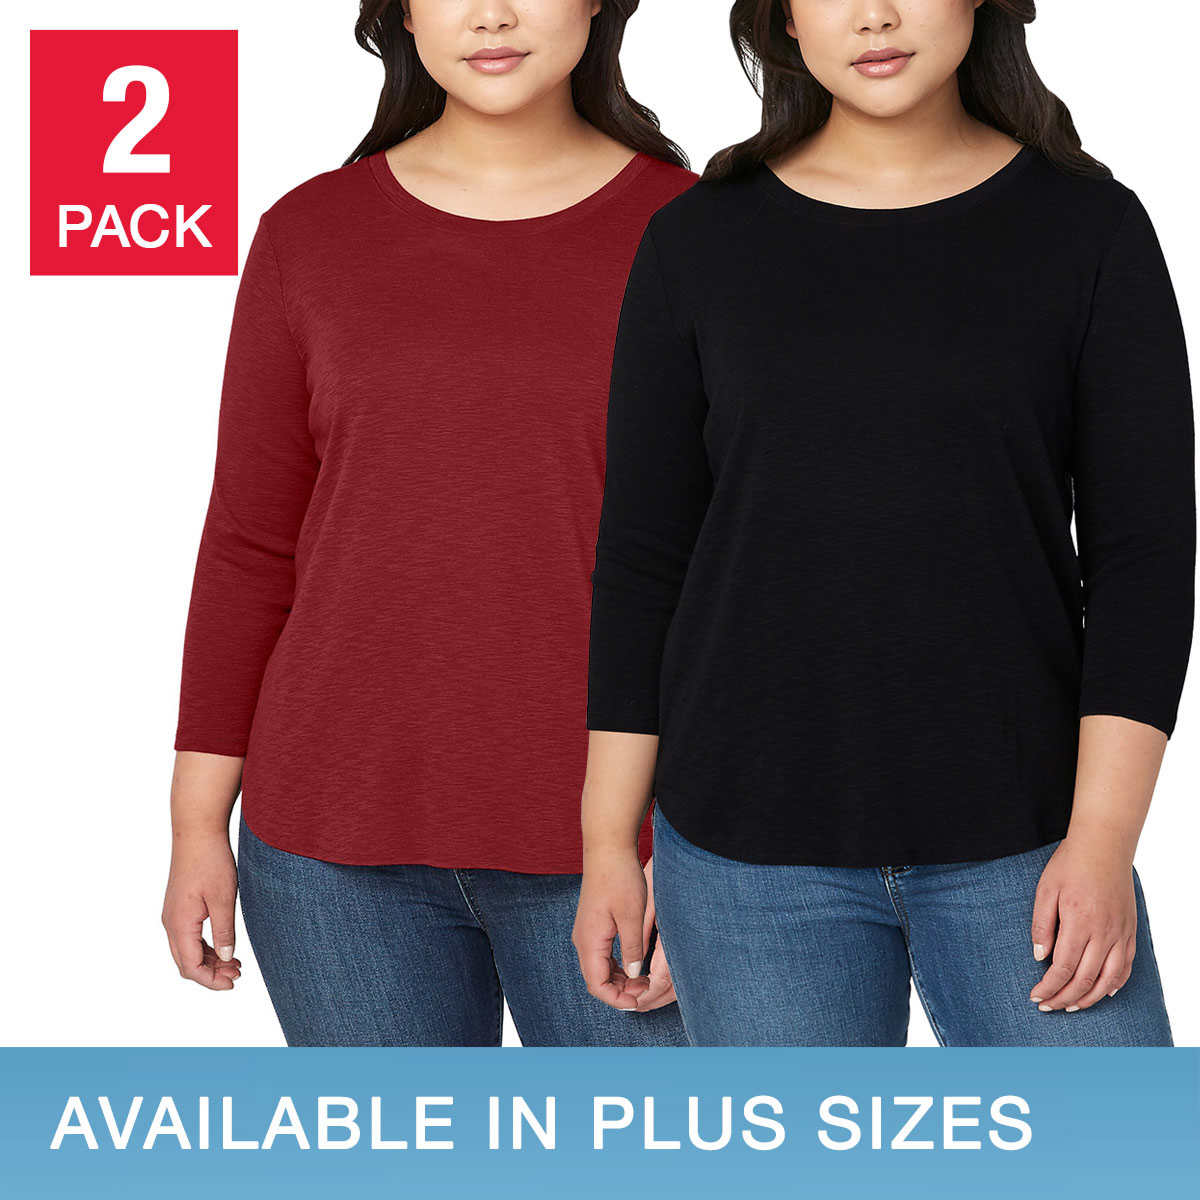 Organic Cotton Girl Shirts - Long Sleeve Tee 2 Pack - Mightly